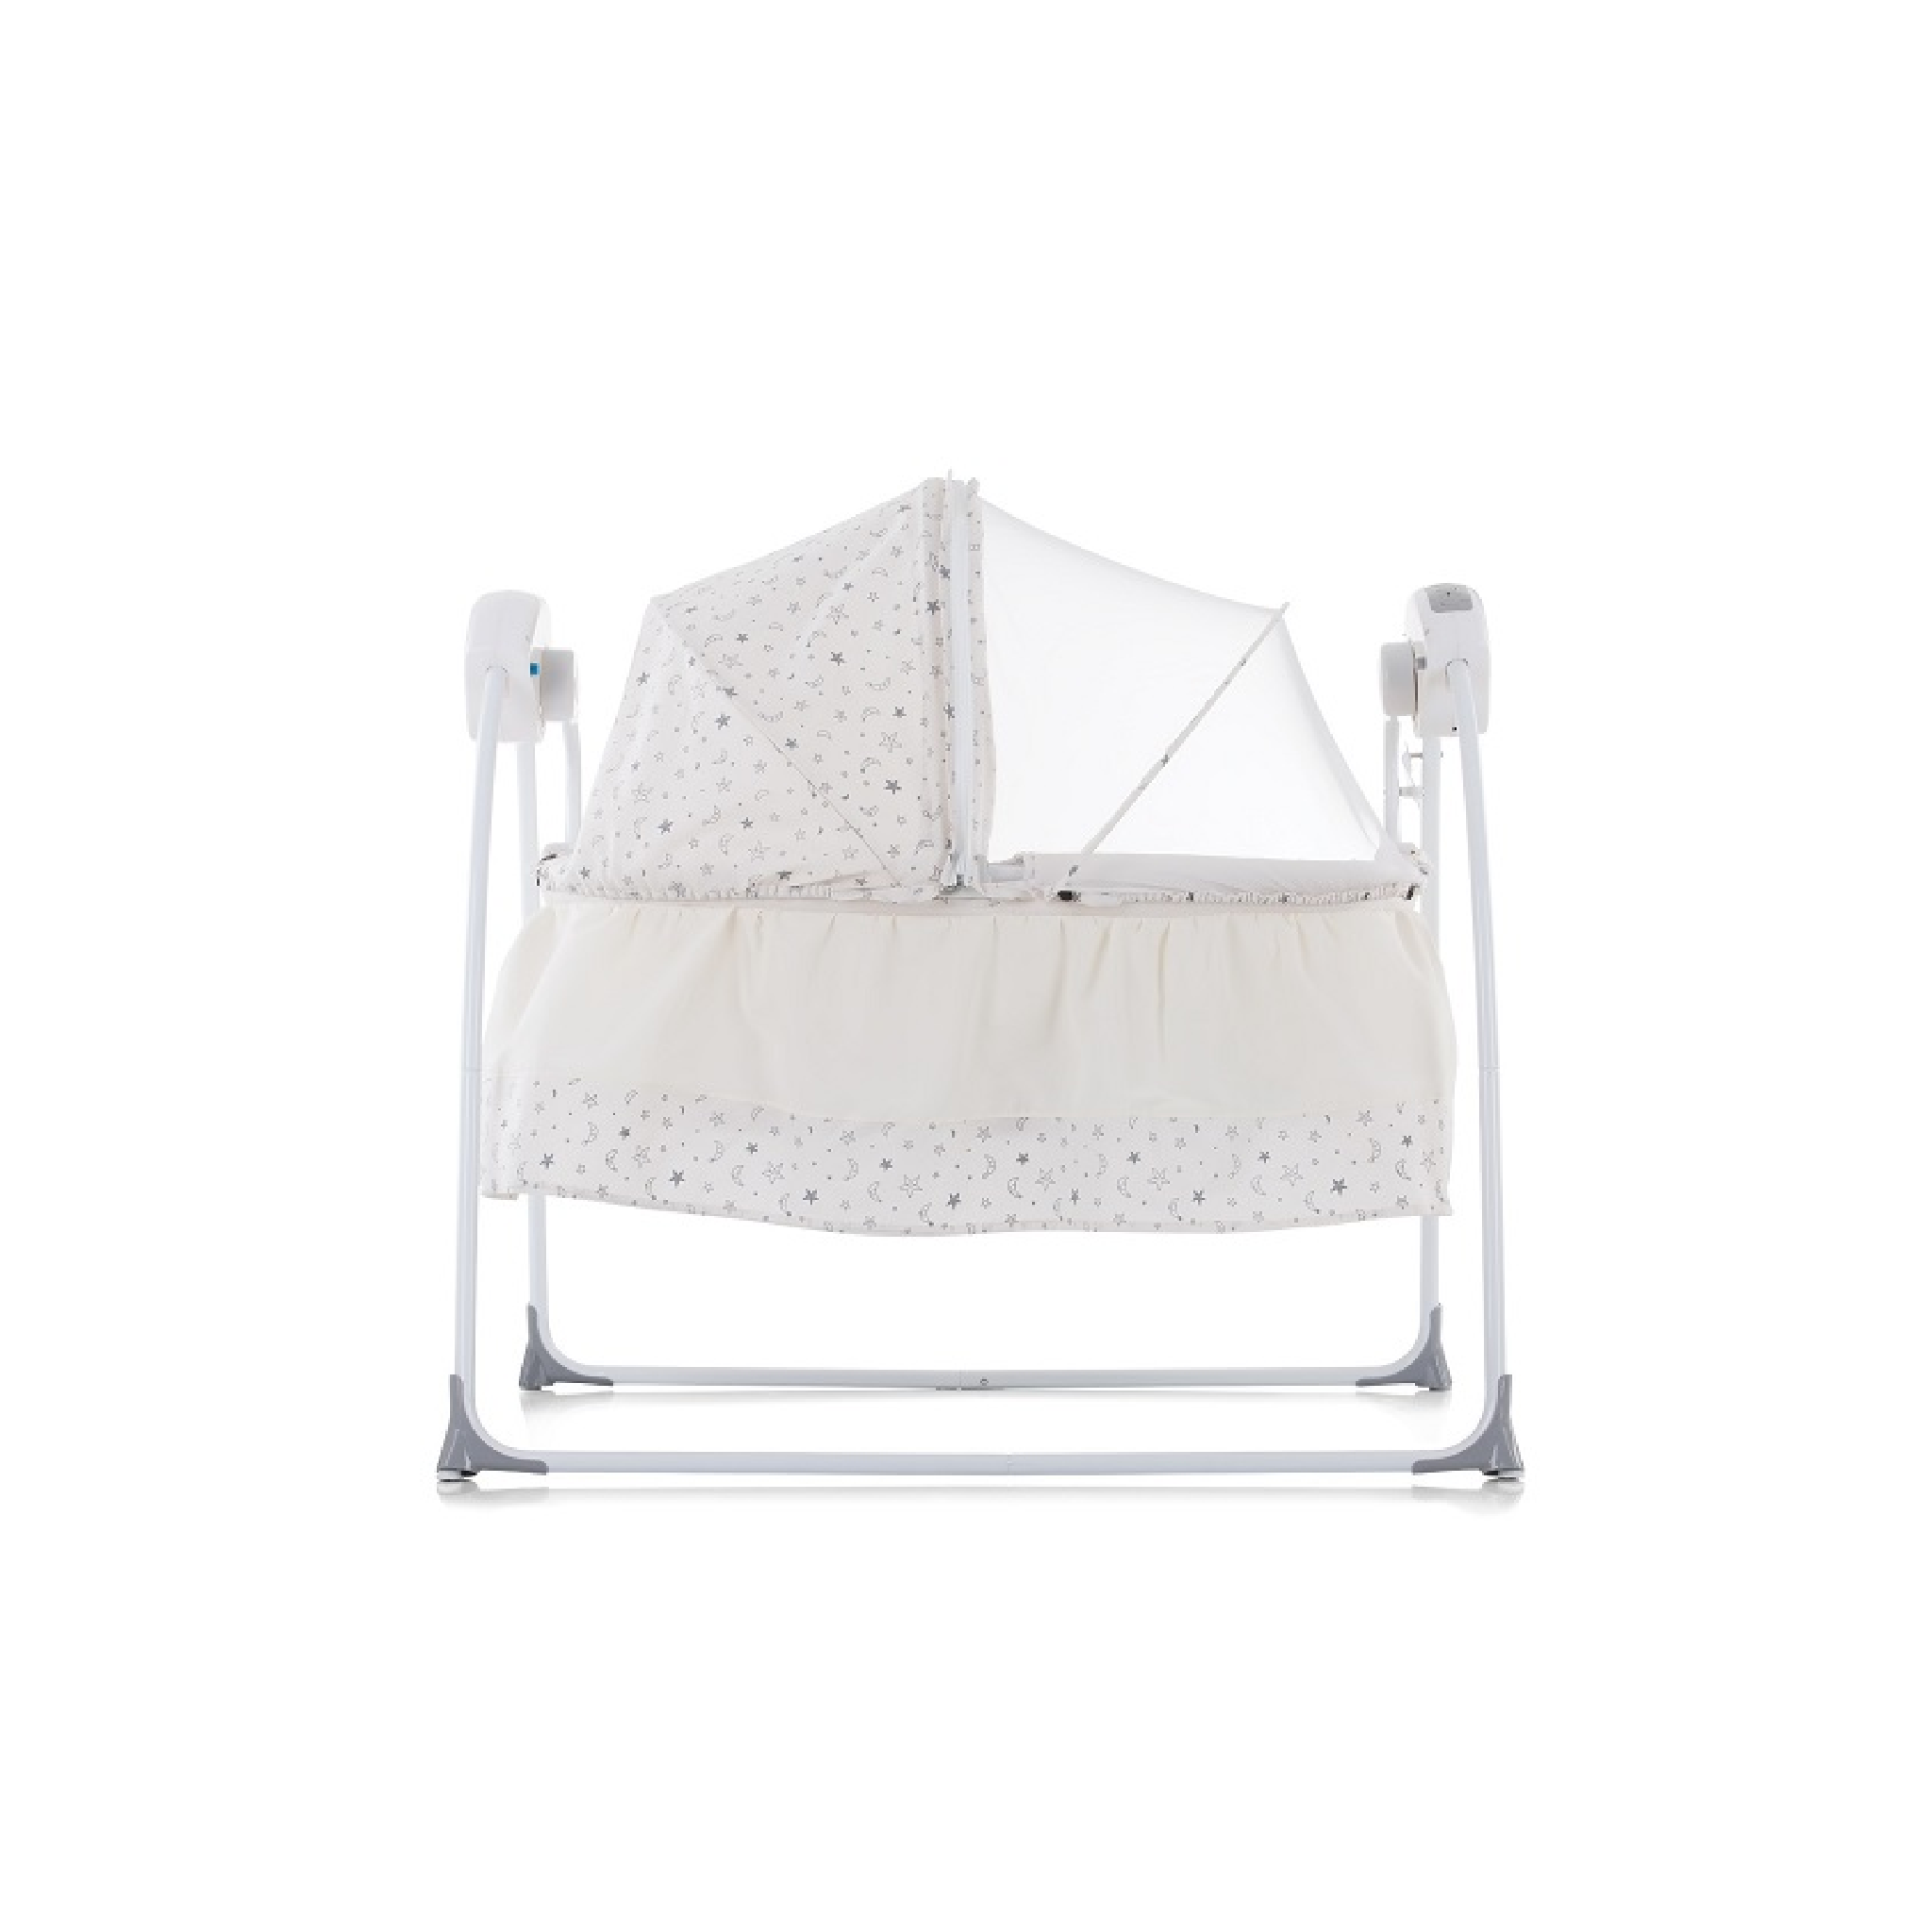 M210825-41 Baby Carriage, Mix Color